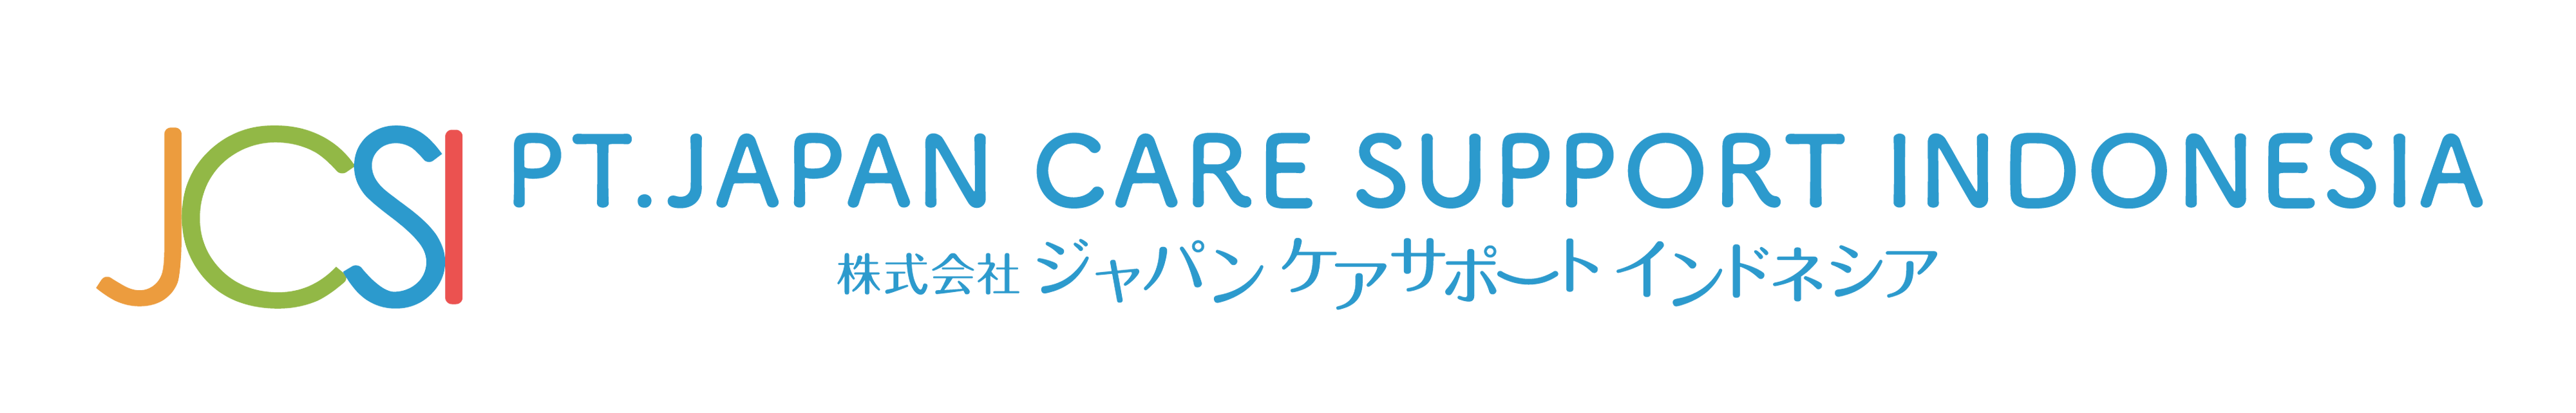 Japan Care Support Indonesia